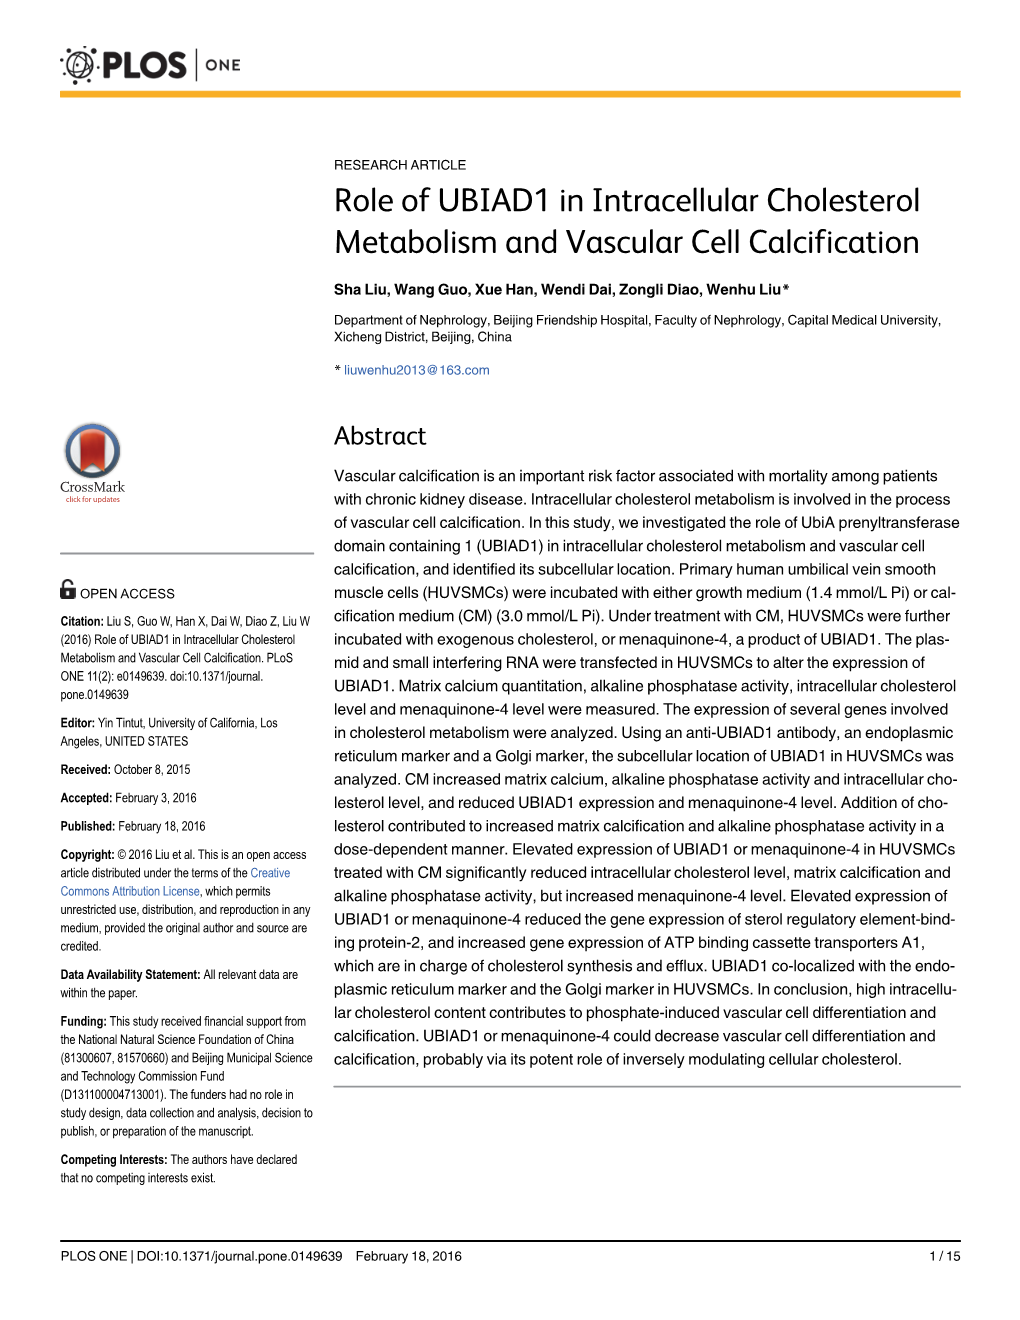 Role of UBIAD1 in Intracellular Cholesterol Metabolism and Vascular Cell Calcification